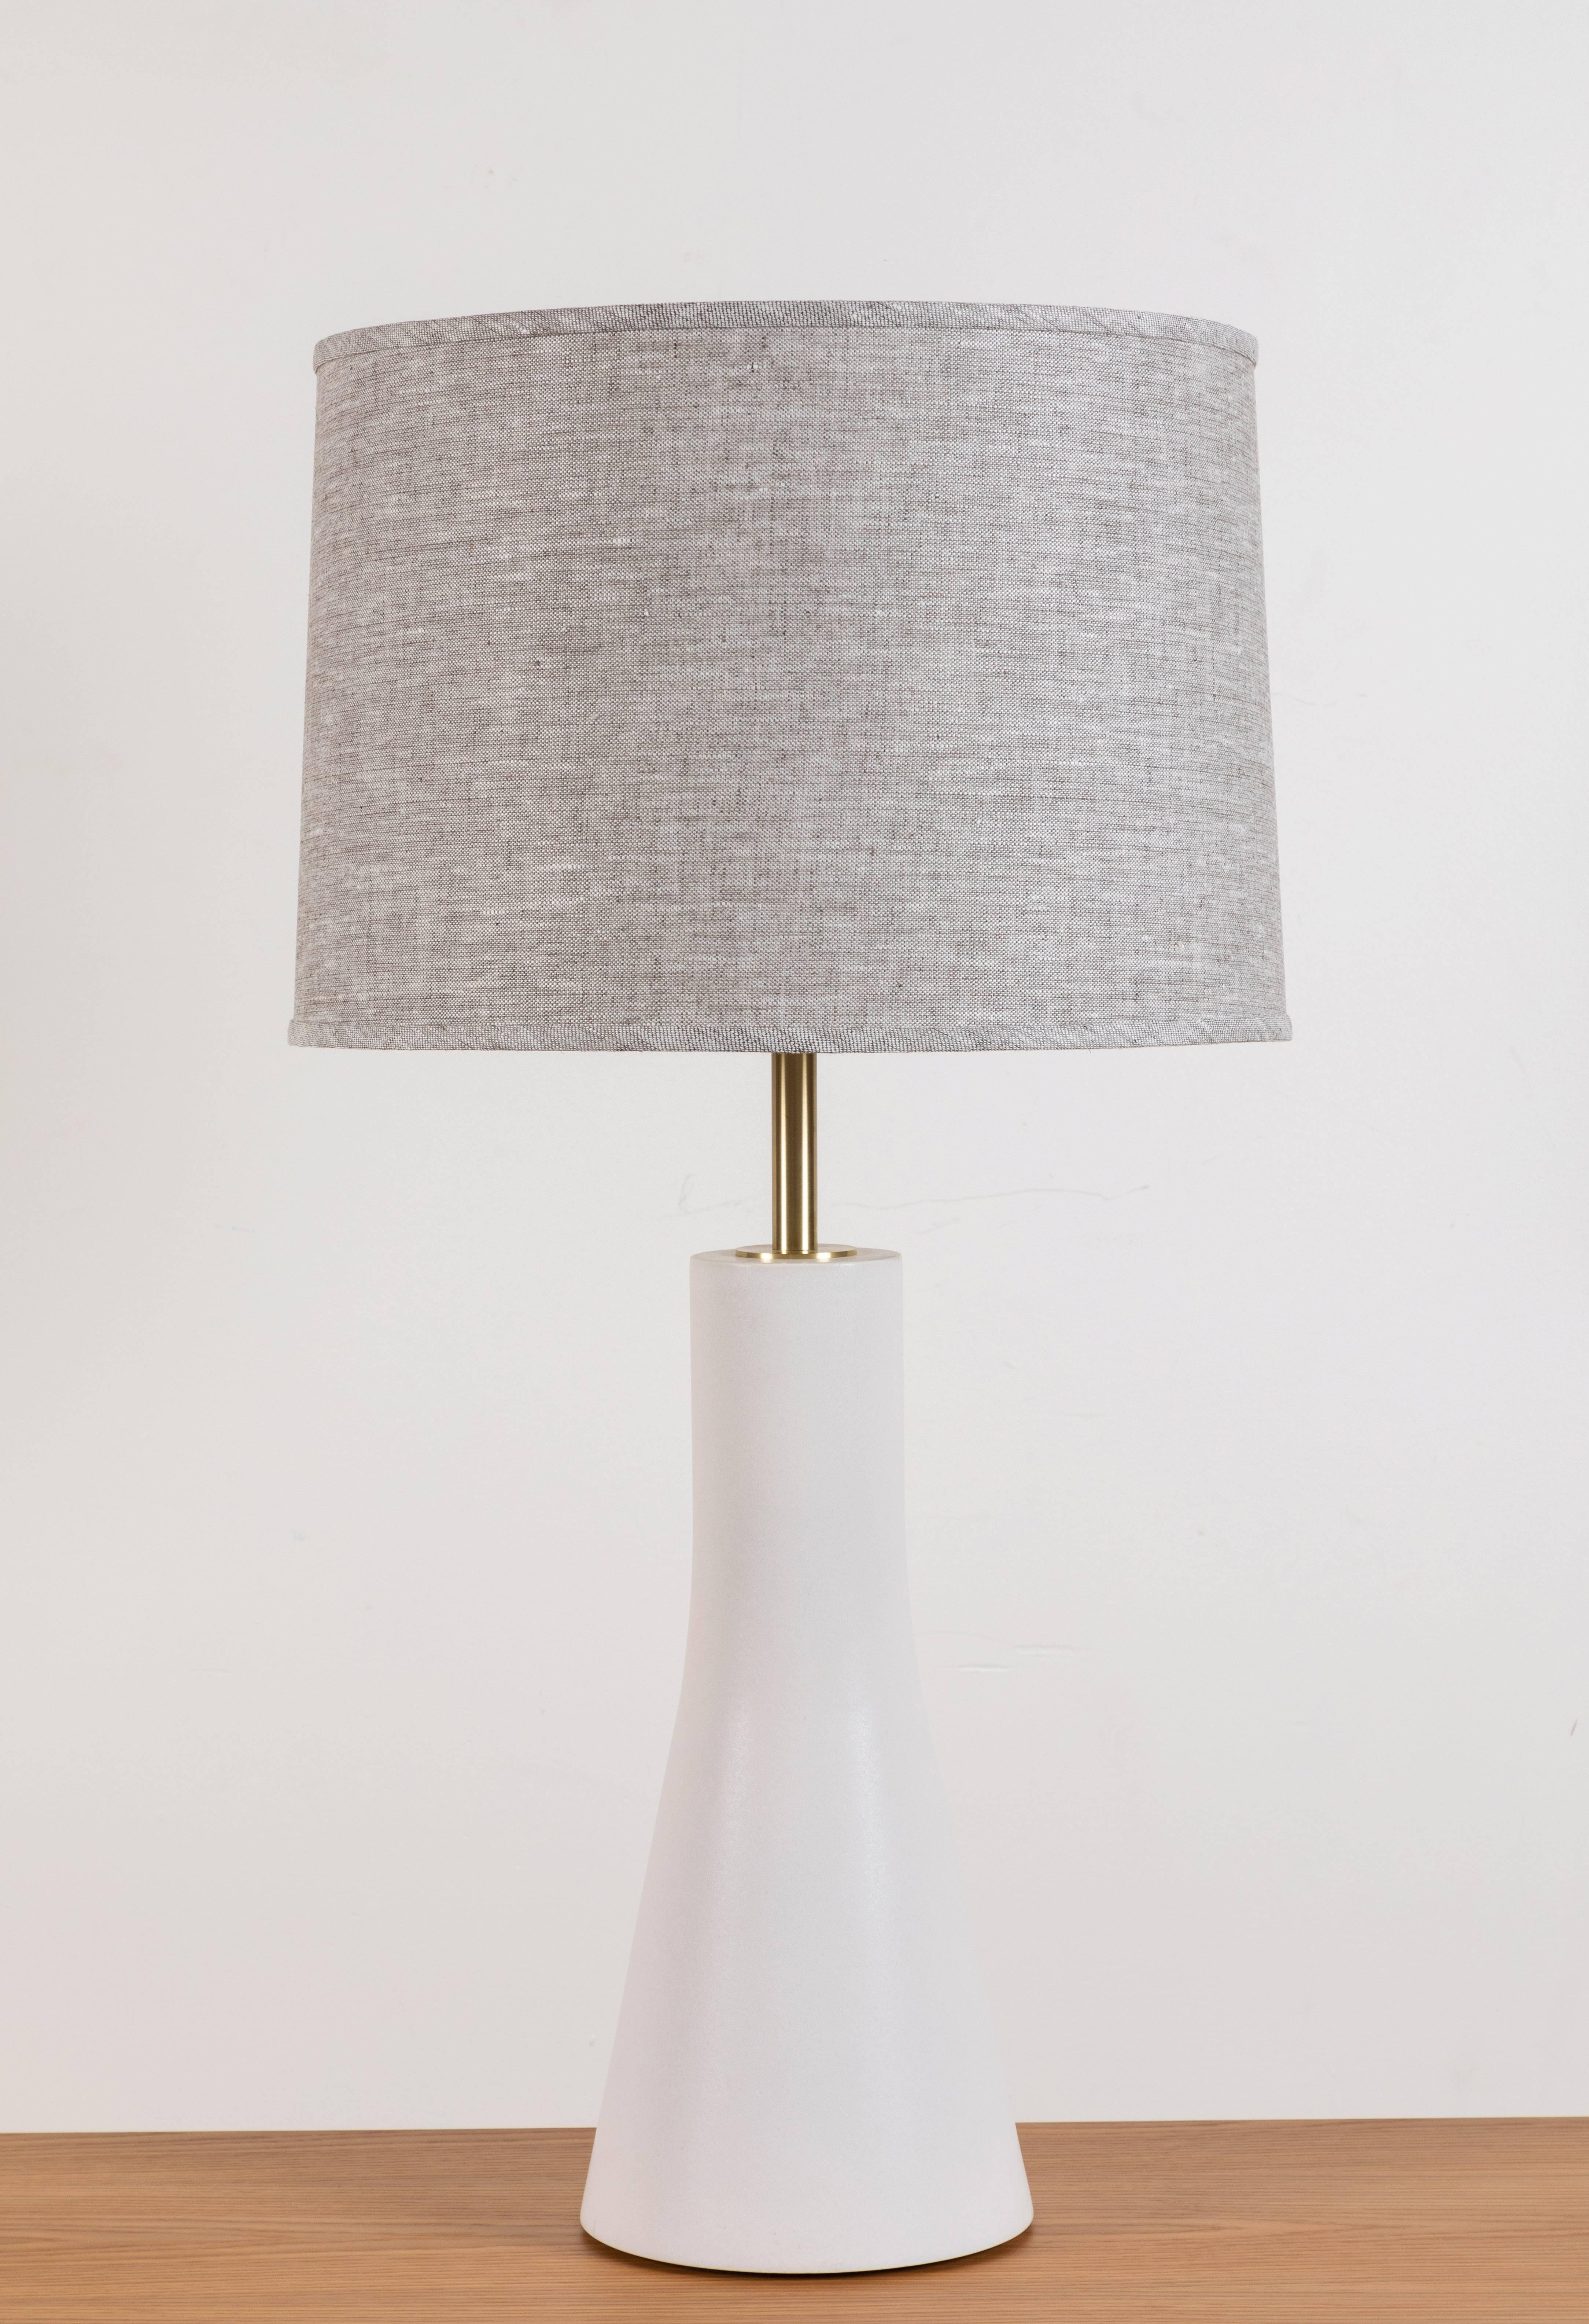 Pair of Bauer lamps by Stone and Sawyer for Lawson-Fenning.